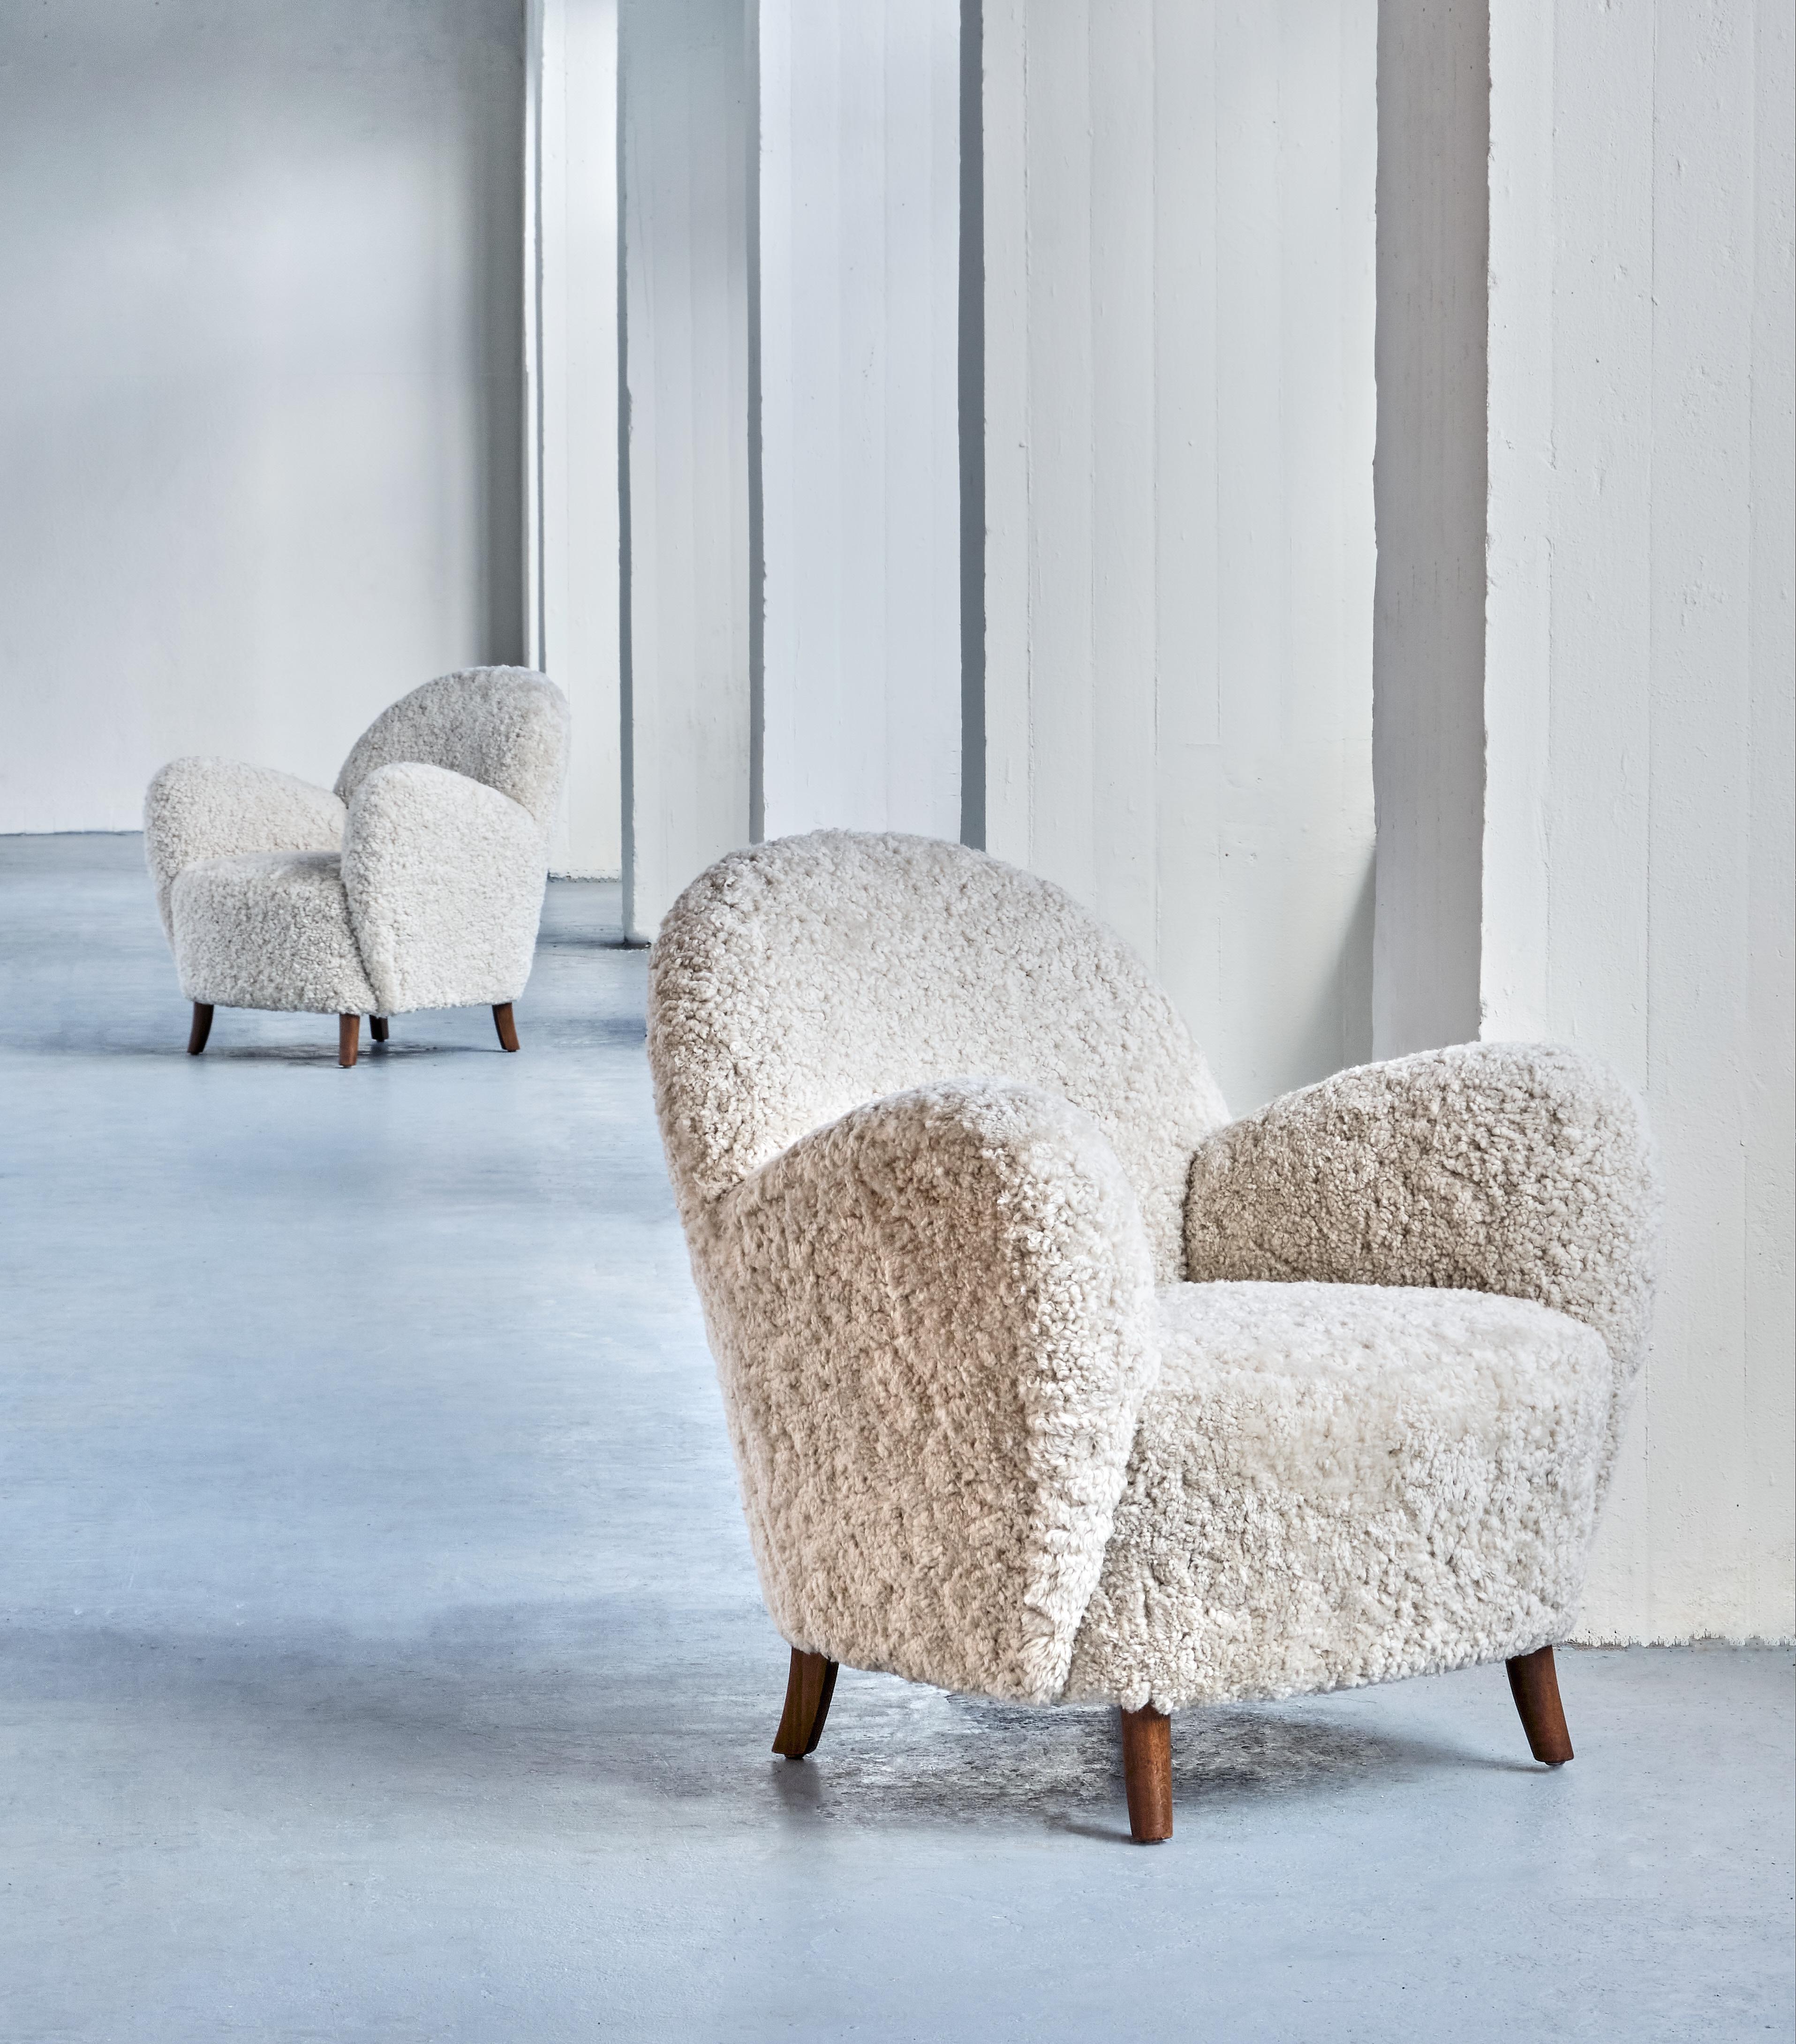 Pair of Thorald Madsen Armchairs in Sheepskin and Beech, Denmark, Mid 1930s For Sale 10